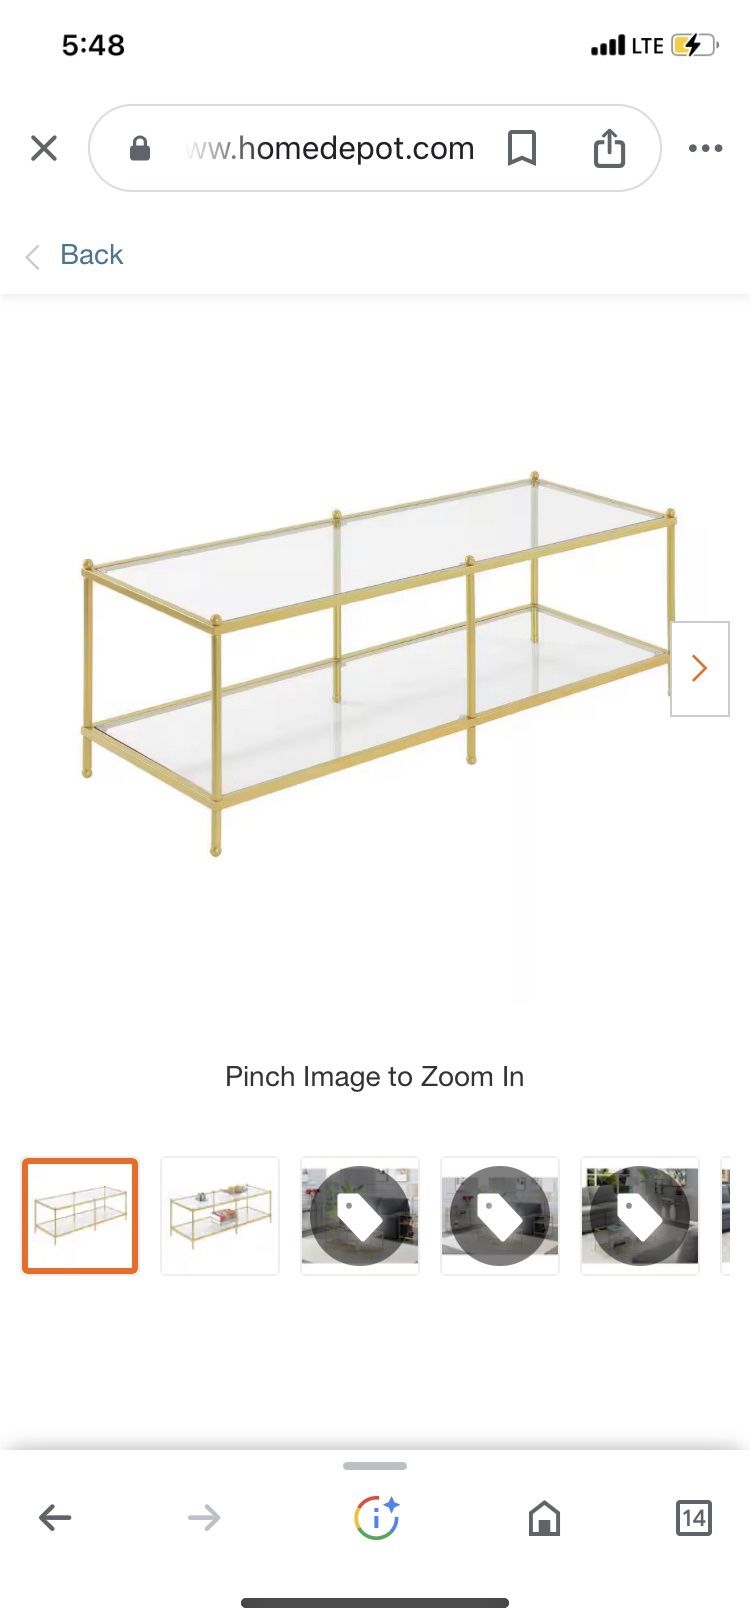 Royal Crest 48 in. Clear/Gold Large Rectangle Glass Coffee Table with Shelf